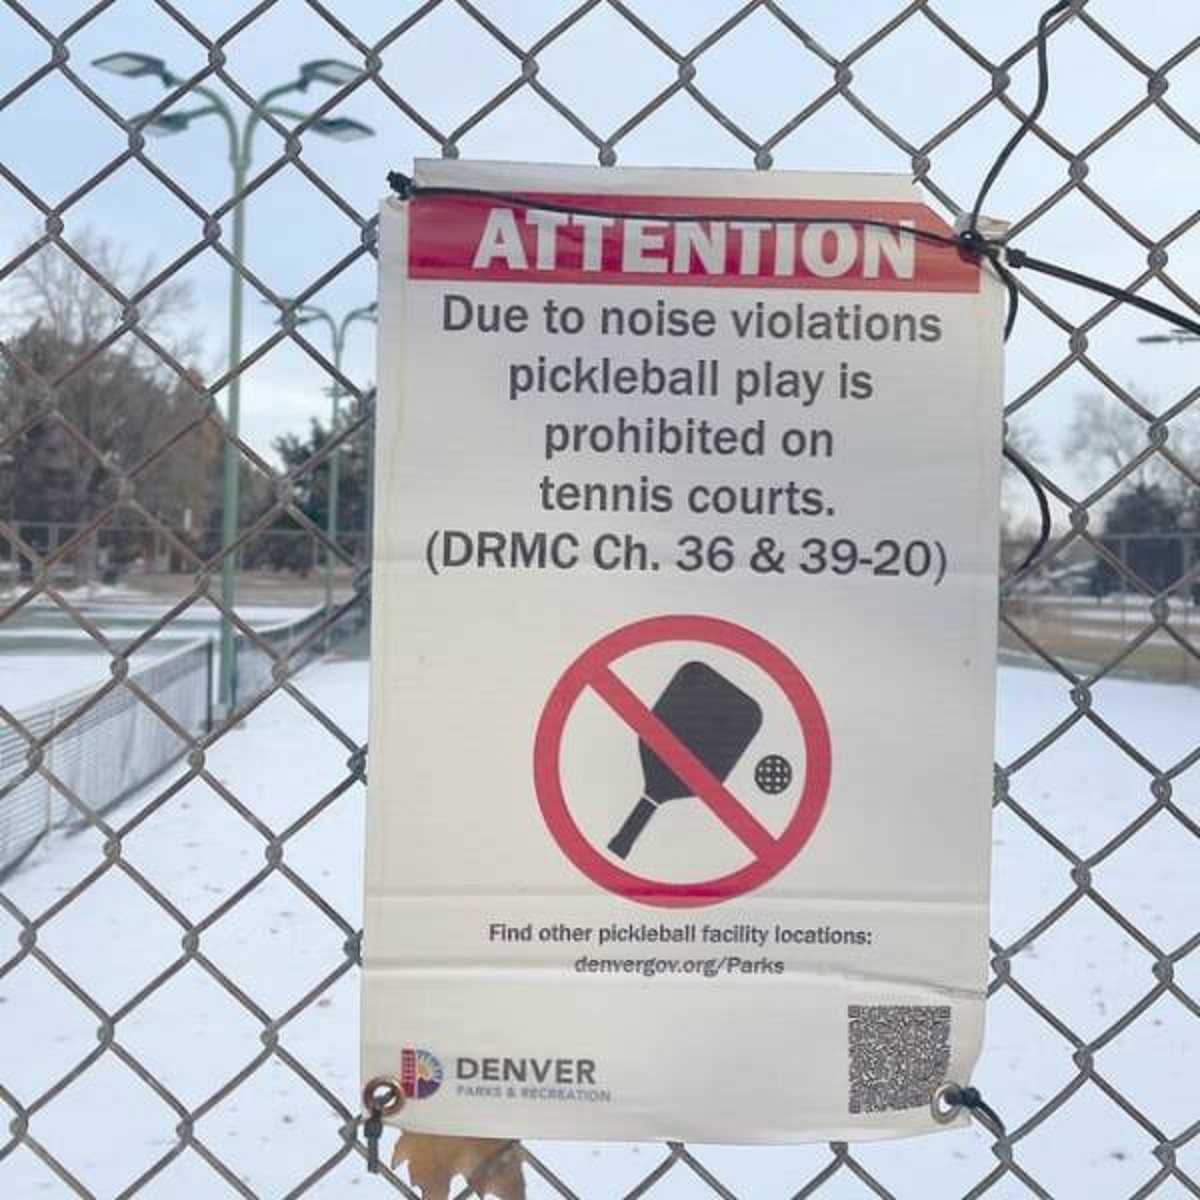 "Pickleball is too noisy for this tennis court"